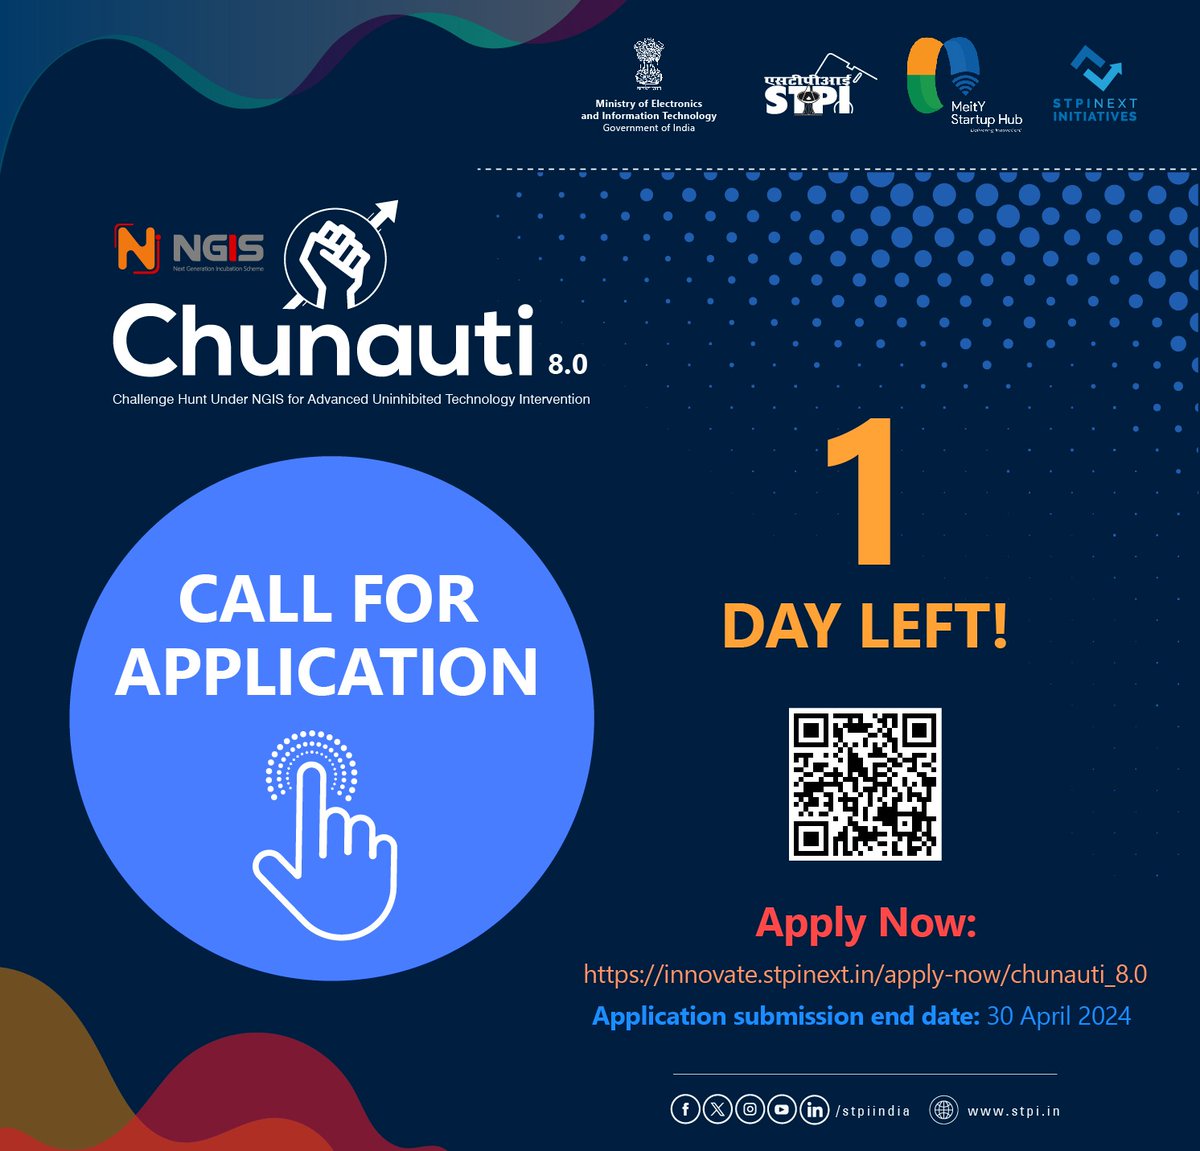 🚀 Calling all tech startups! 🚀 Only 1 day left to join CHUNAUTI 8.0 under #NGIS & propel your innovative ideas to new heights. Don't miss out on this chance to showcase your potential and secure invaluable support. Apply now: innovate.stpinext.in/apply-now/chun… Last Date: 30.04.2024.